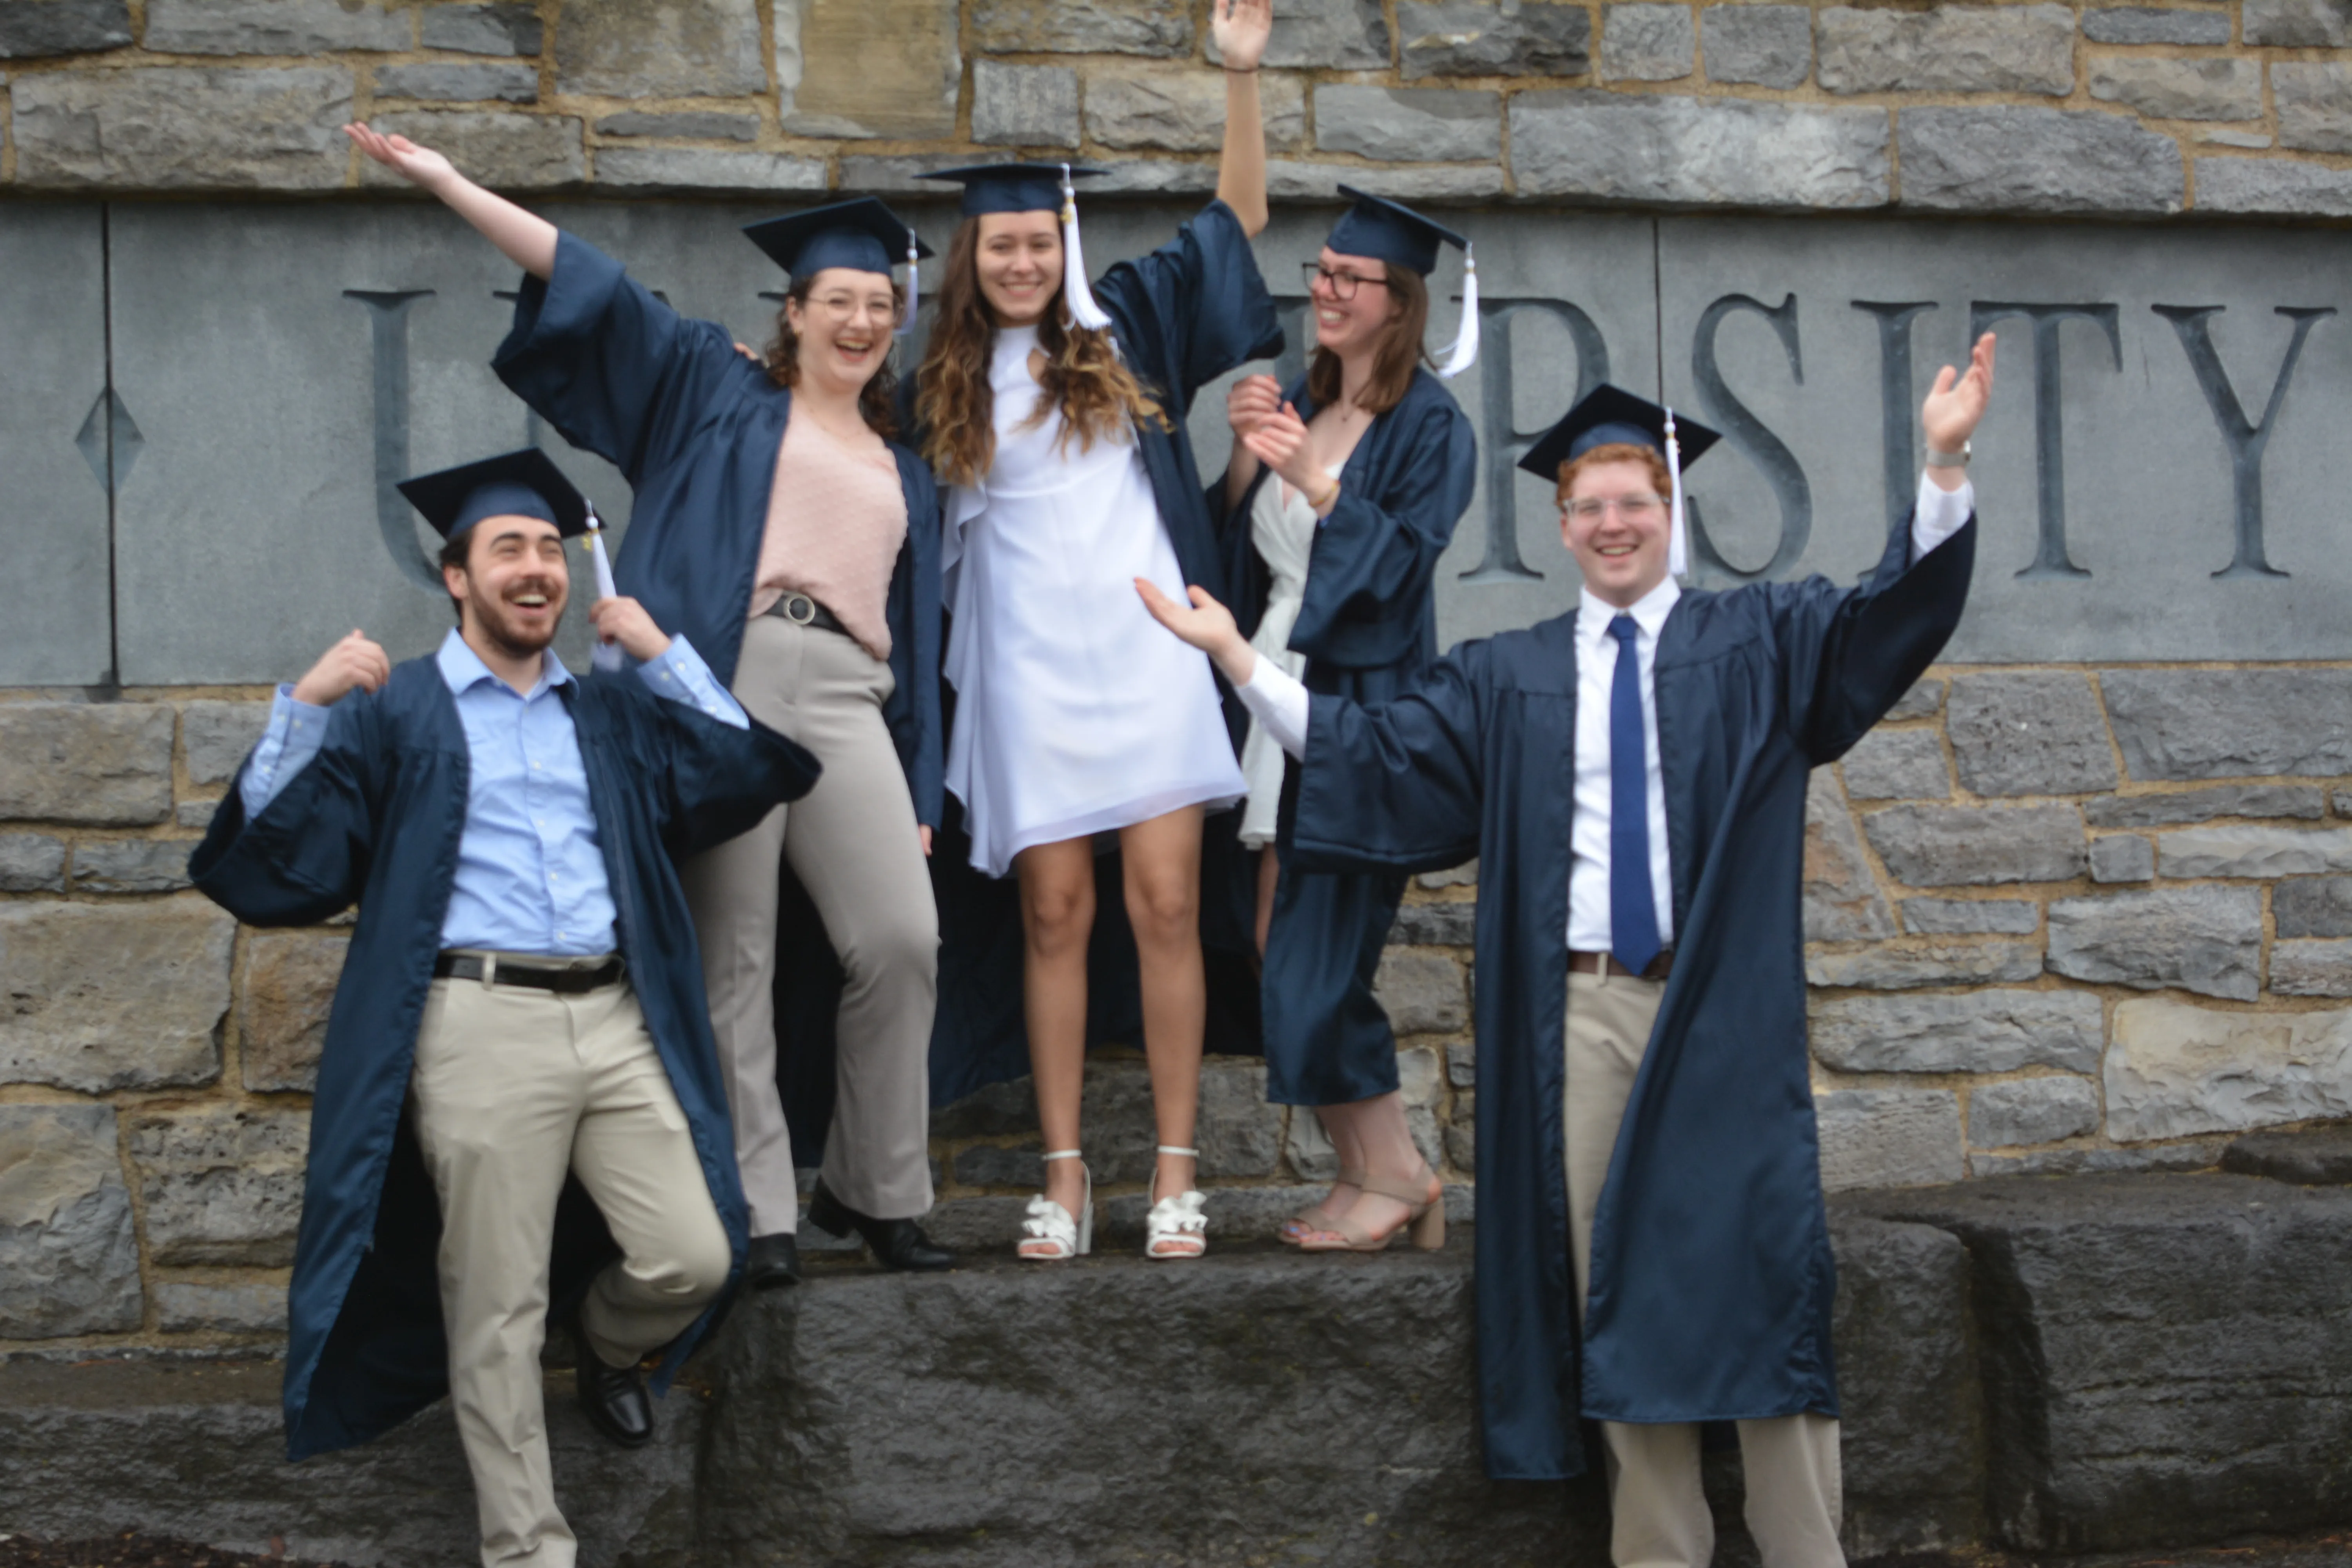 Three young women and two young men wearing blue graduation caps and gowns. All have arms pumped in the air and are smiling